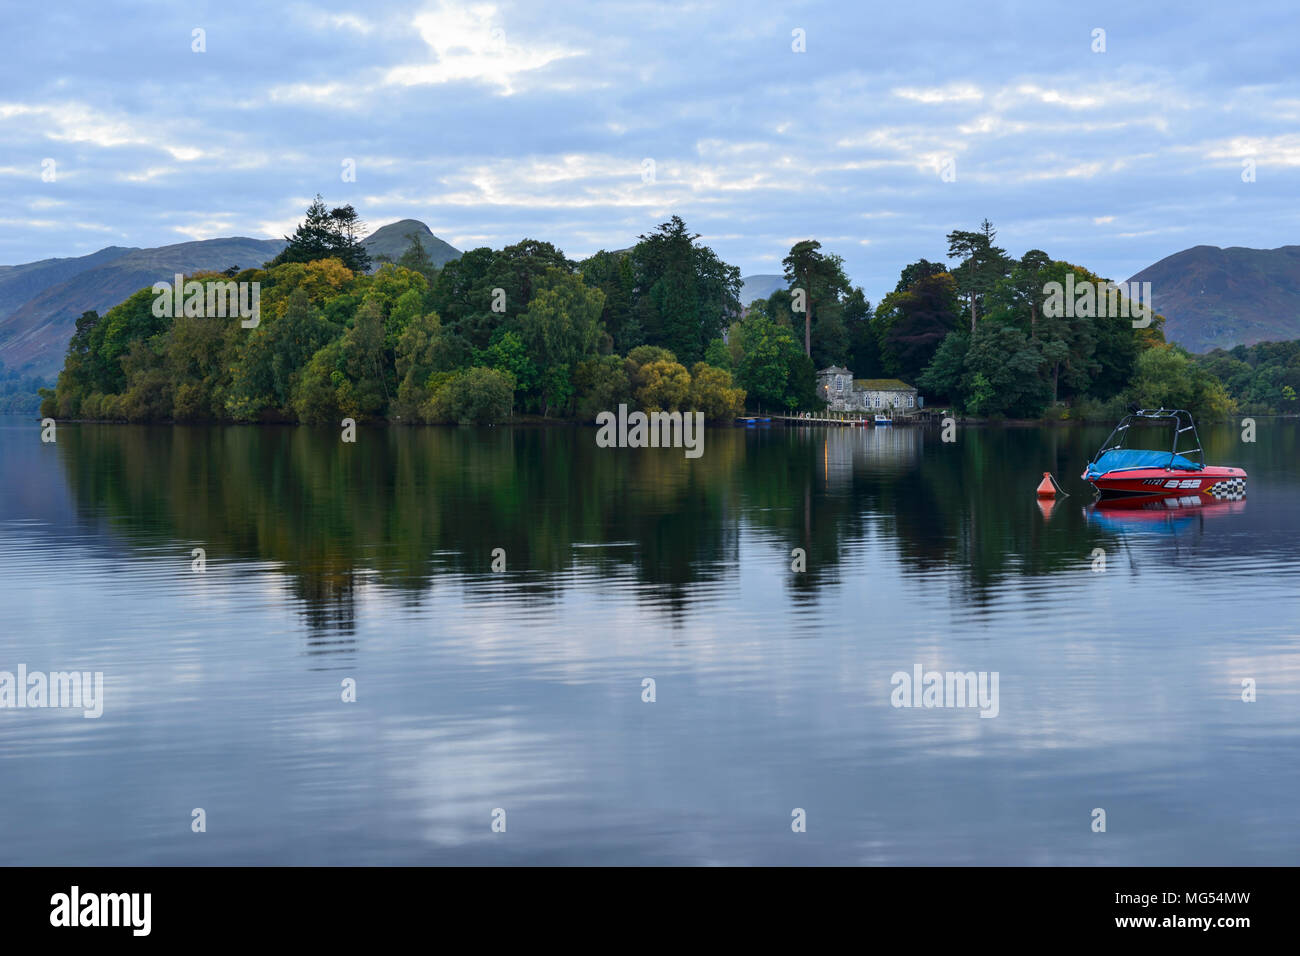 Derwent Isle near Keswick on Derwent Water in the Lake District National Park in Cumbria, England Stock Photo